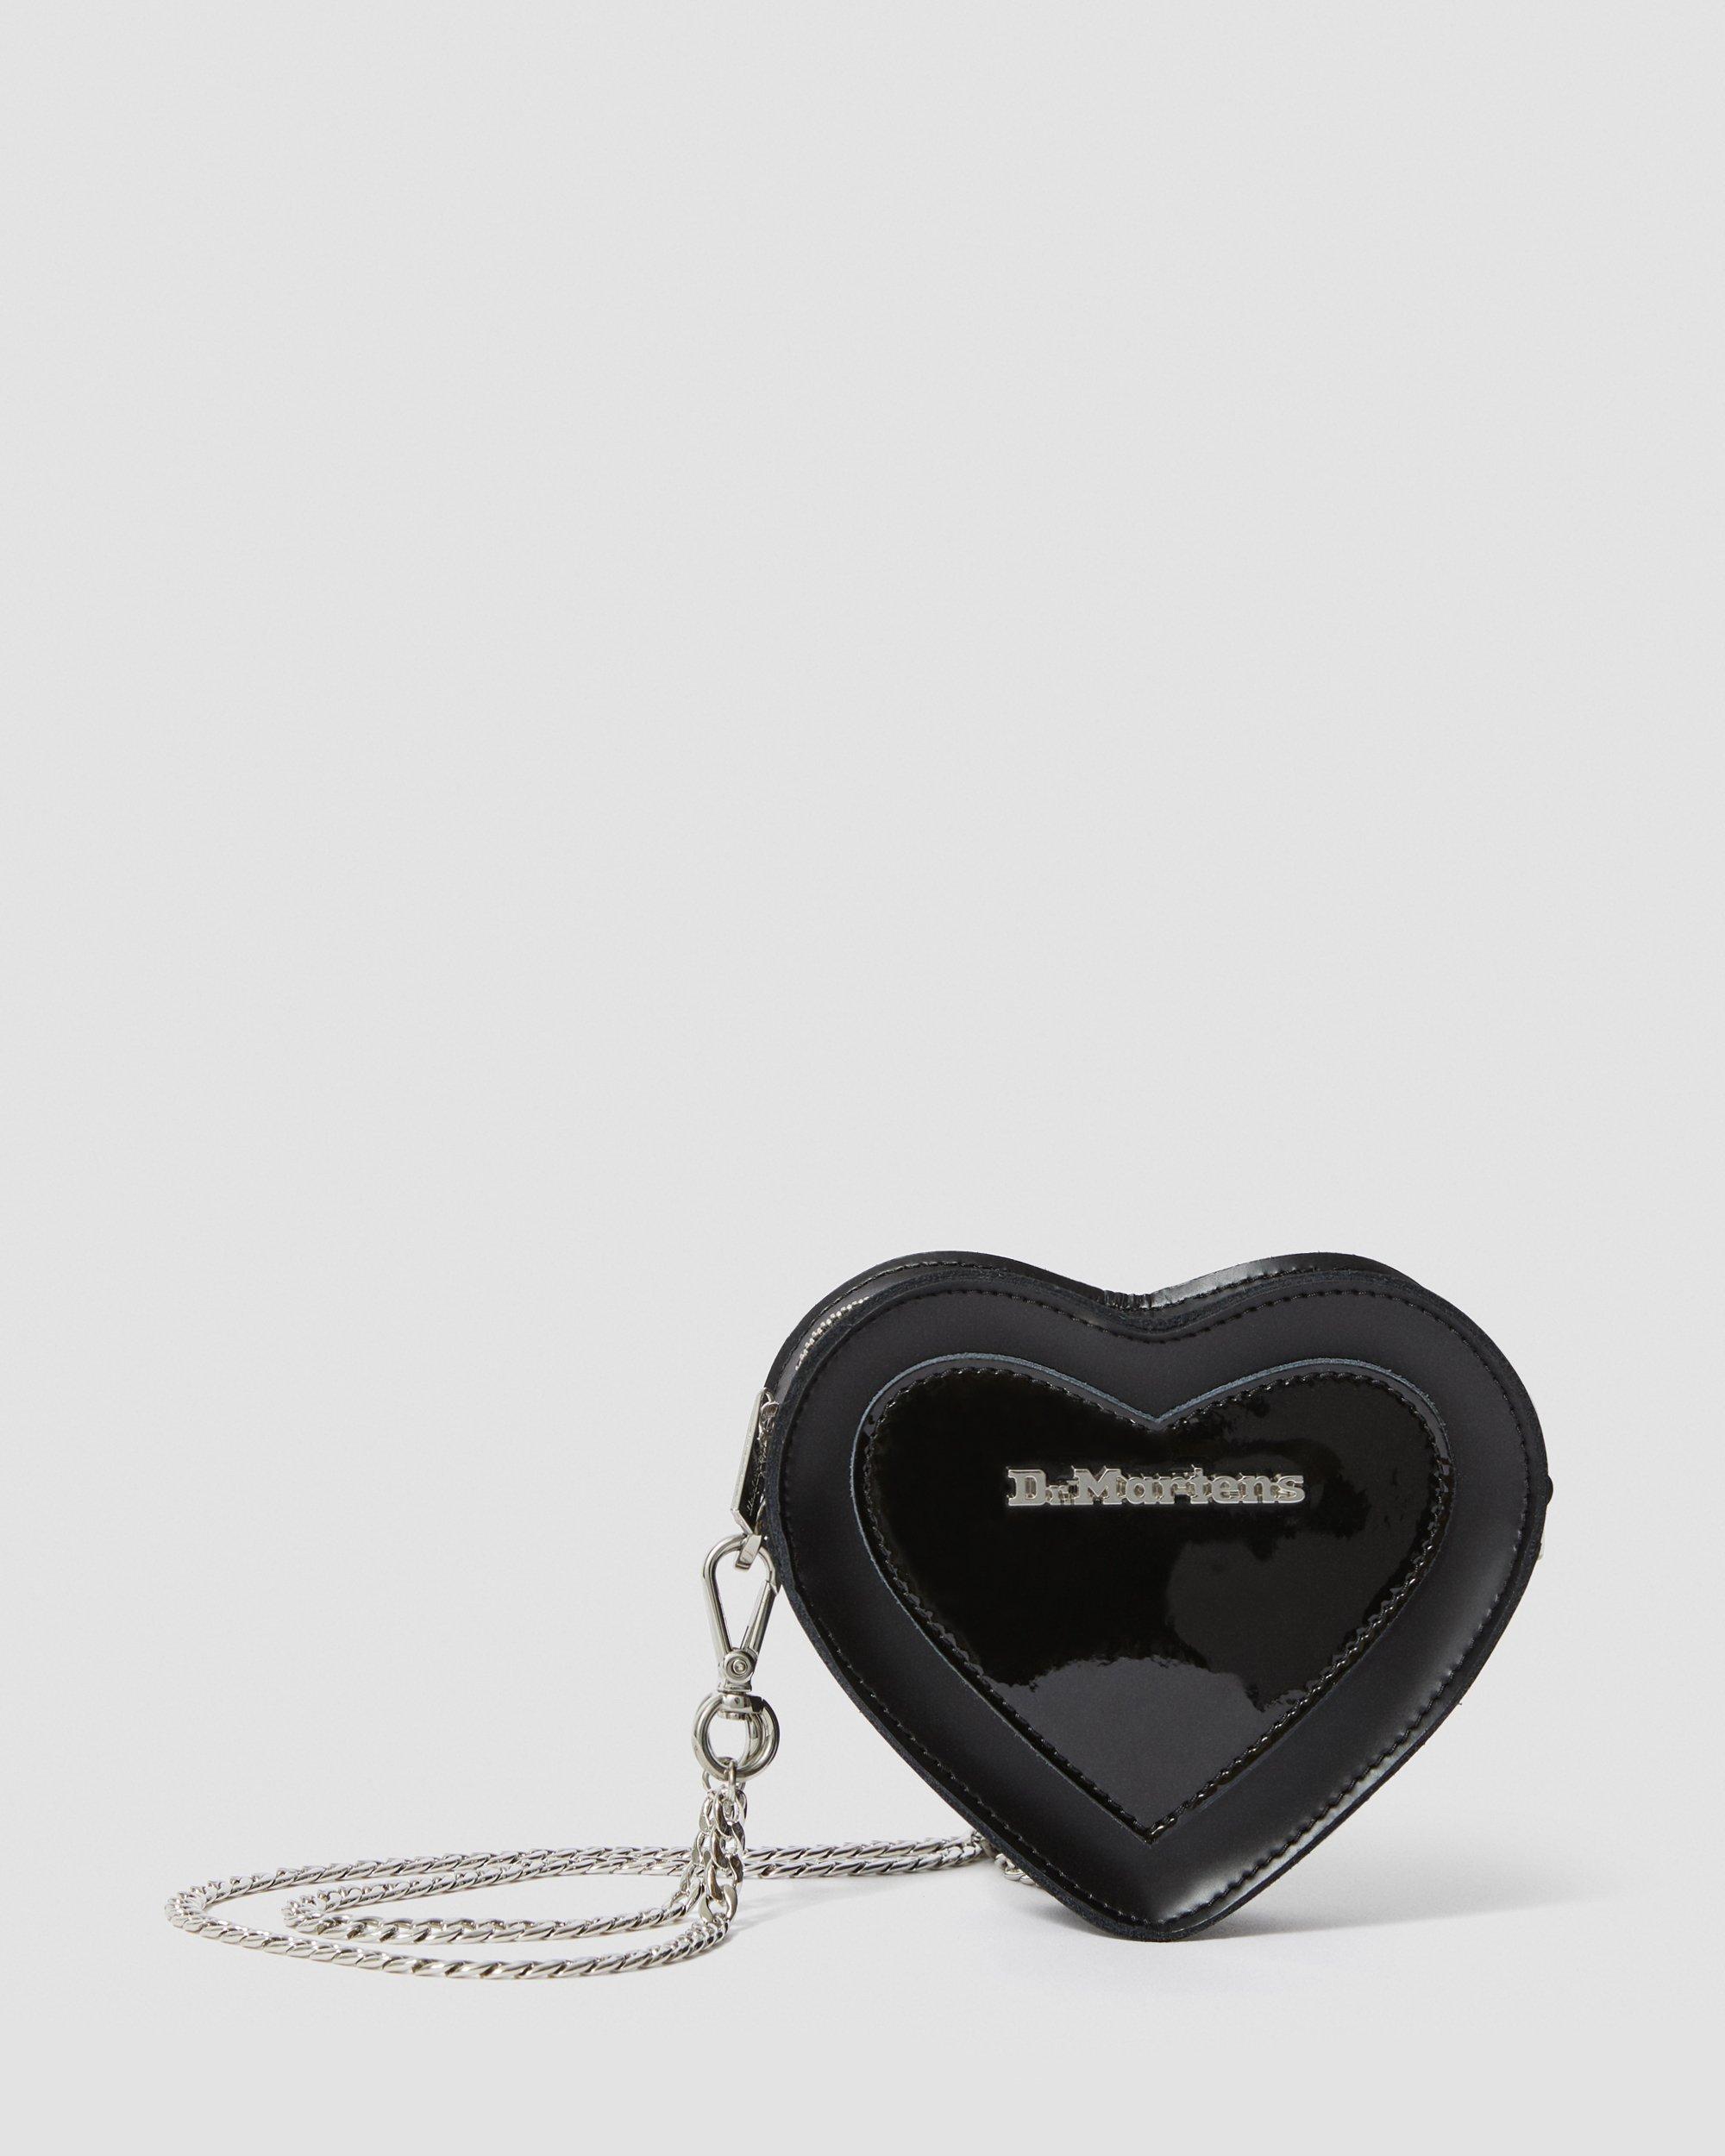 Heart Shaped Leather Purse in Black | Dr. Martens